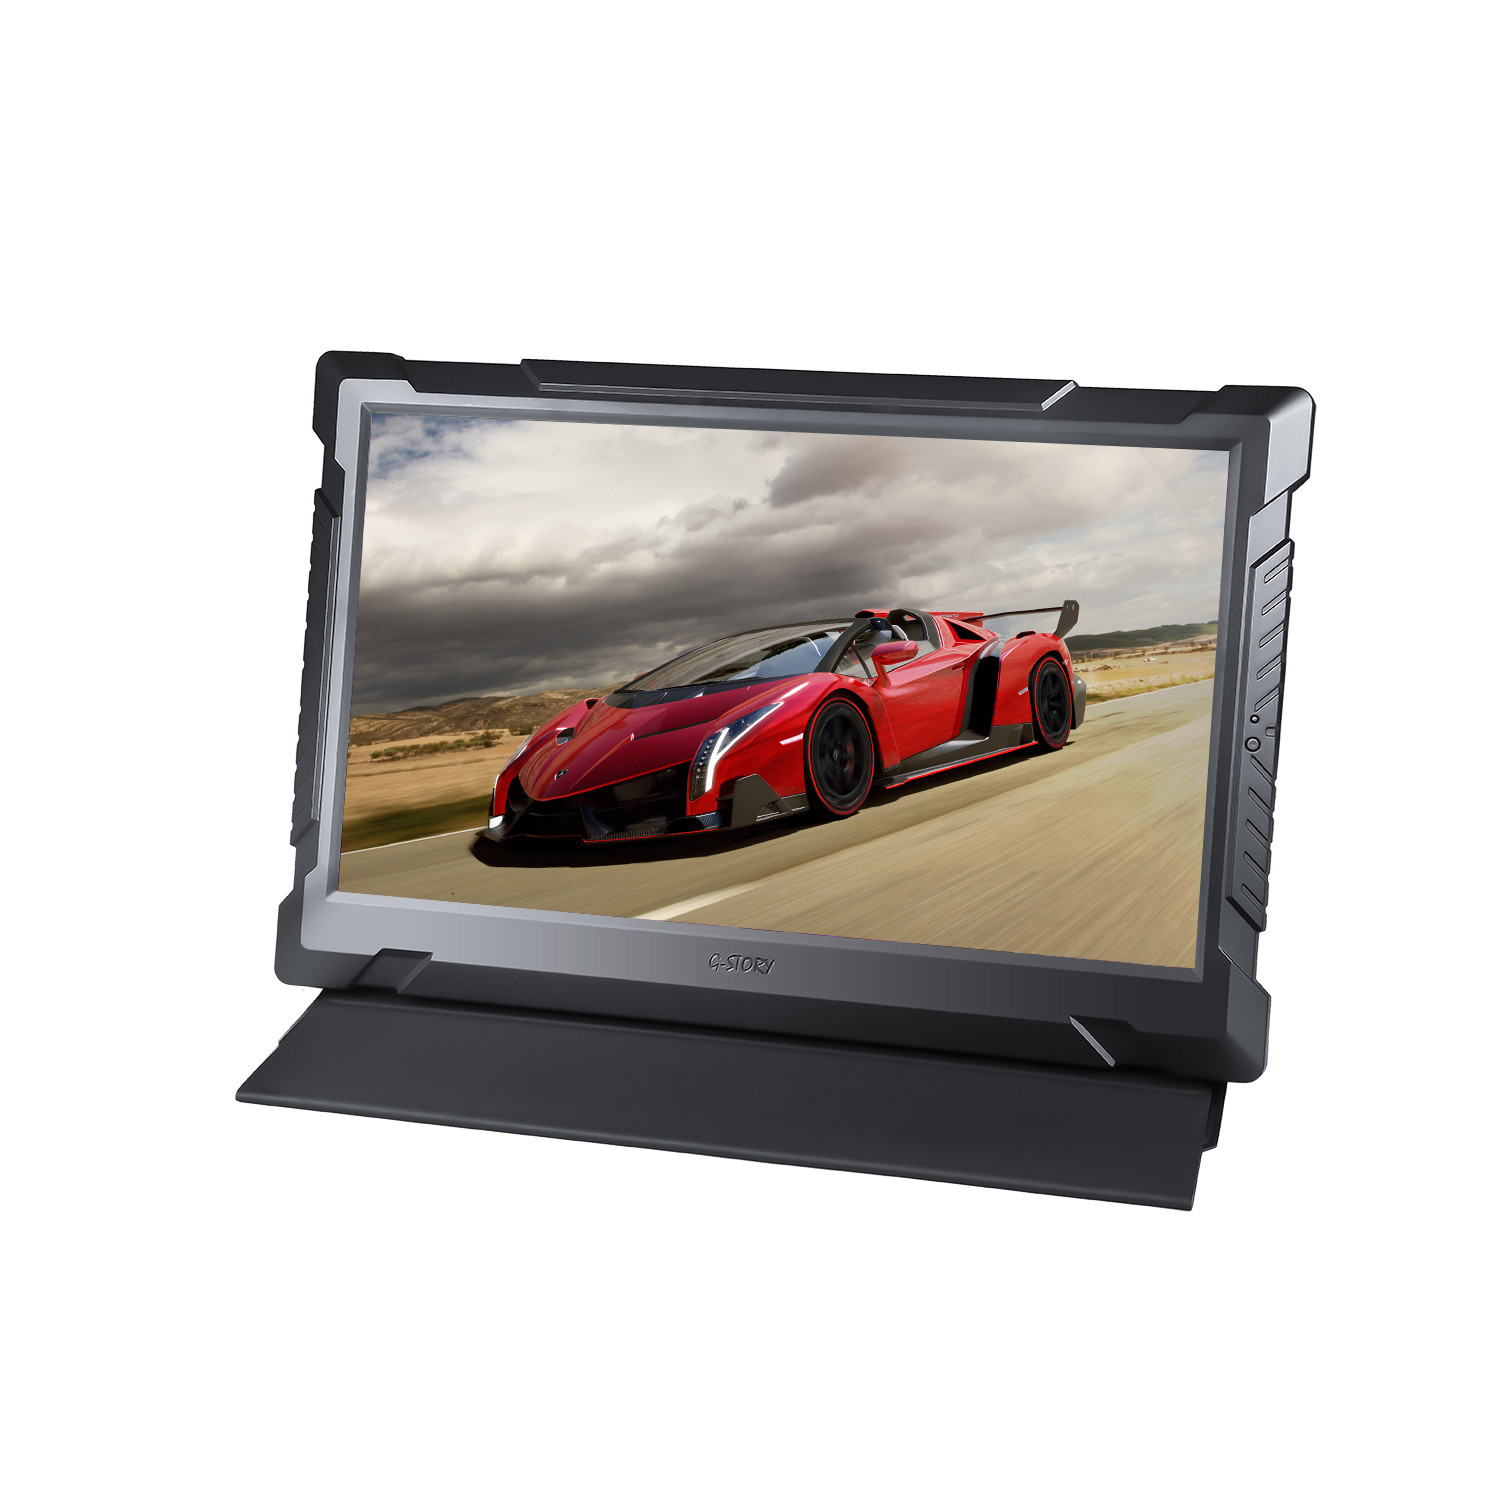 G-STORY High Resolution PS4 Portable Monitor With Dual Build In Speakers 3840x2160p